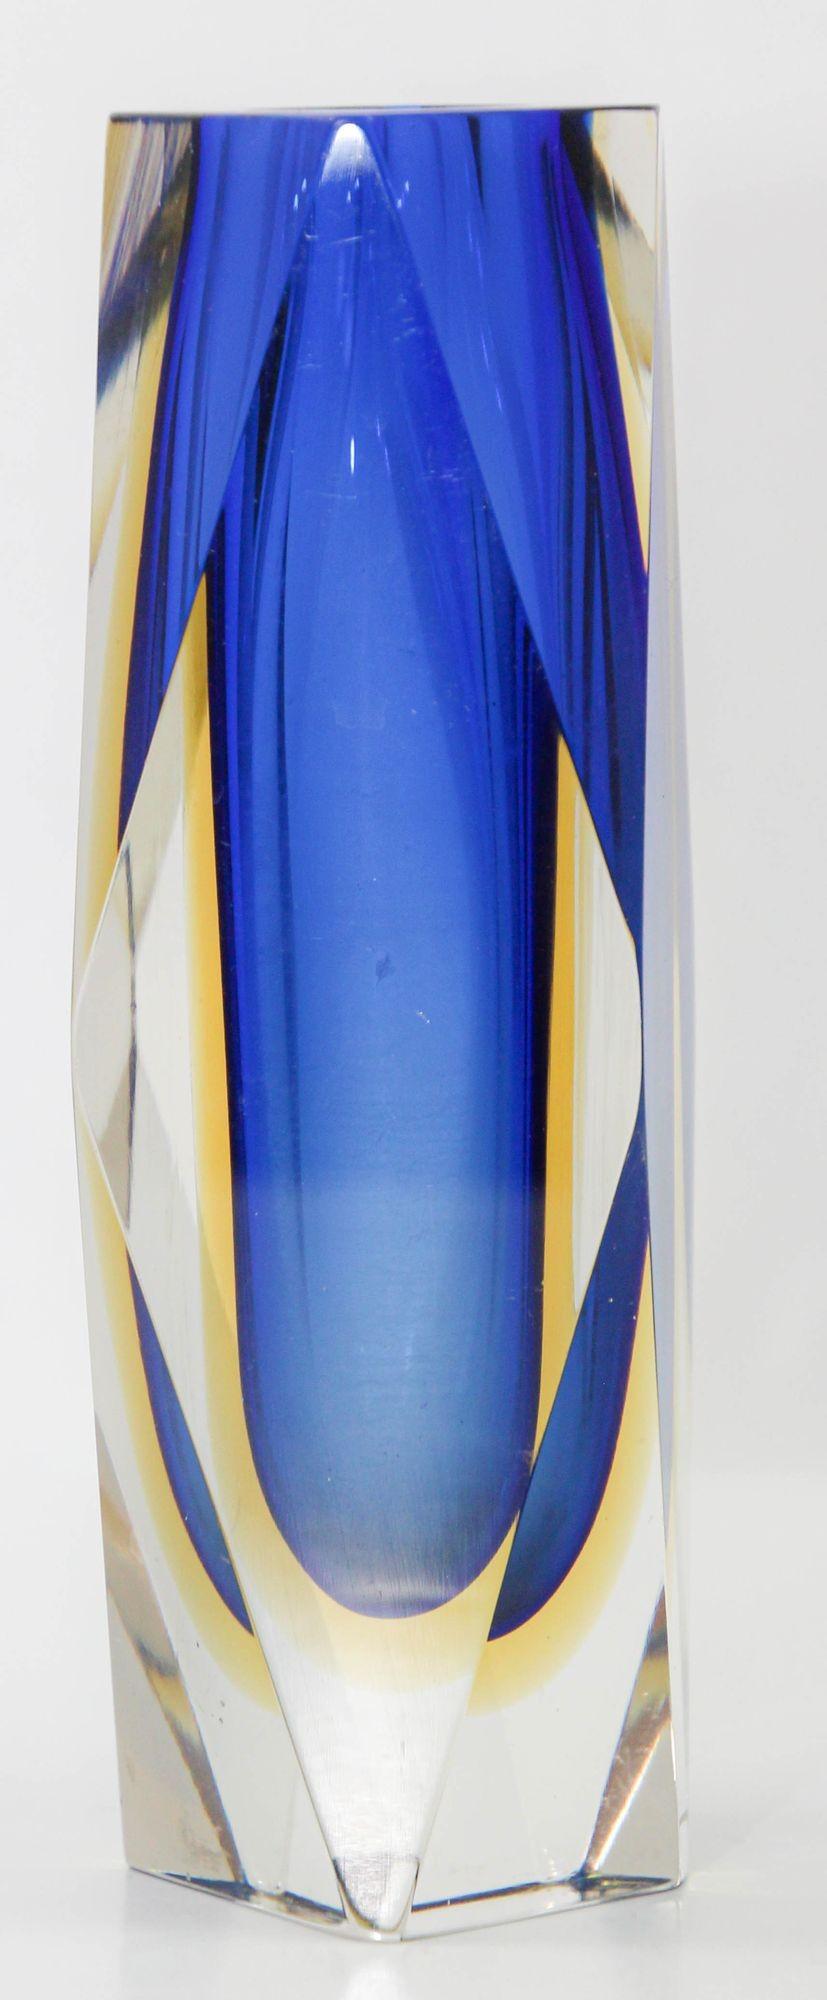 A stunning vintage Sommerso Murano glass vase, designed by Flavio Poli and crafted by Alessandro Mandruzzato, showcases a captivating combination of blue, yellow, and clear hues.
This Italian masterpiece from the 1960s features faceted Venetian